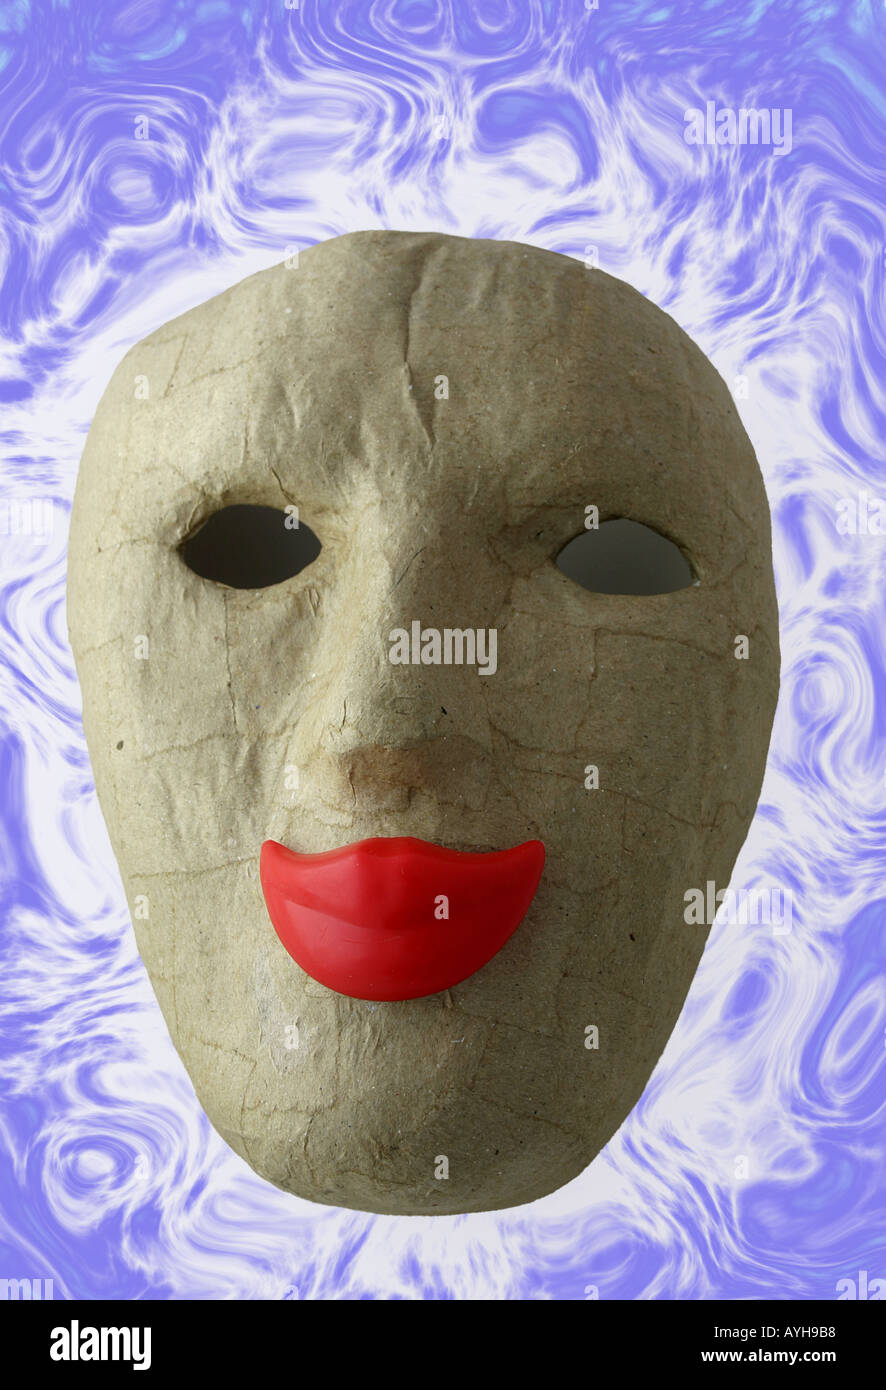 Face mask with smiling red lips and emphasised cornona or aura around the mask Stock Photo